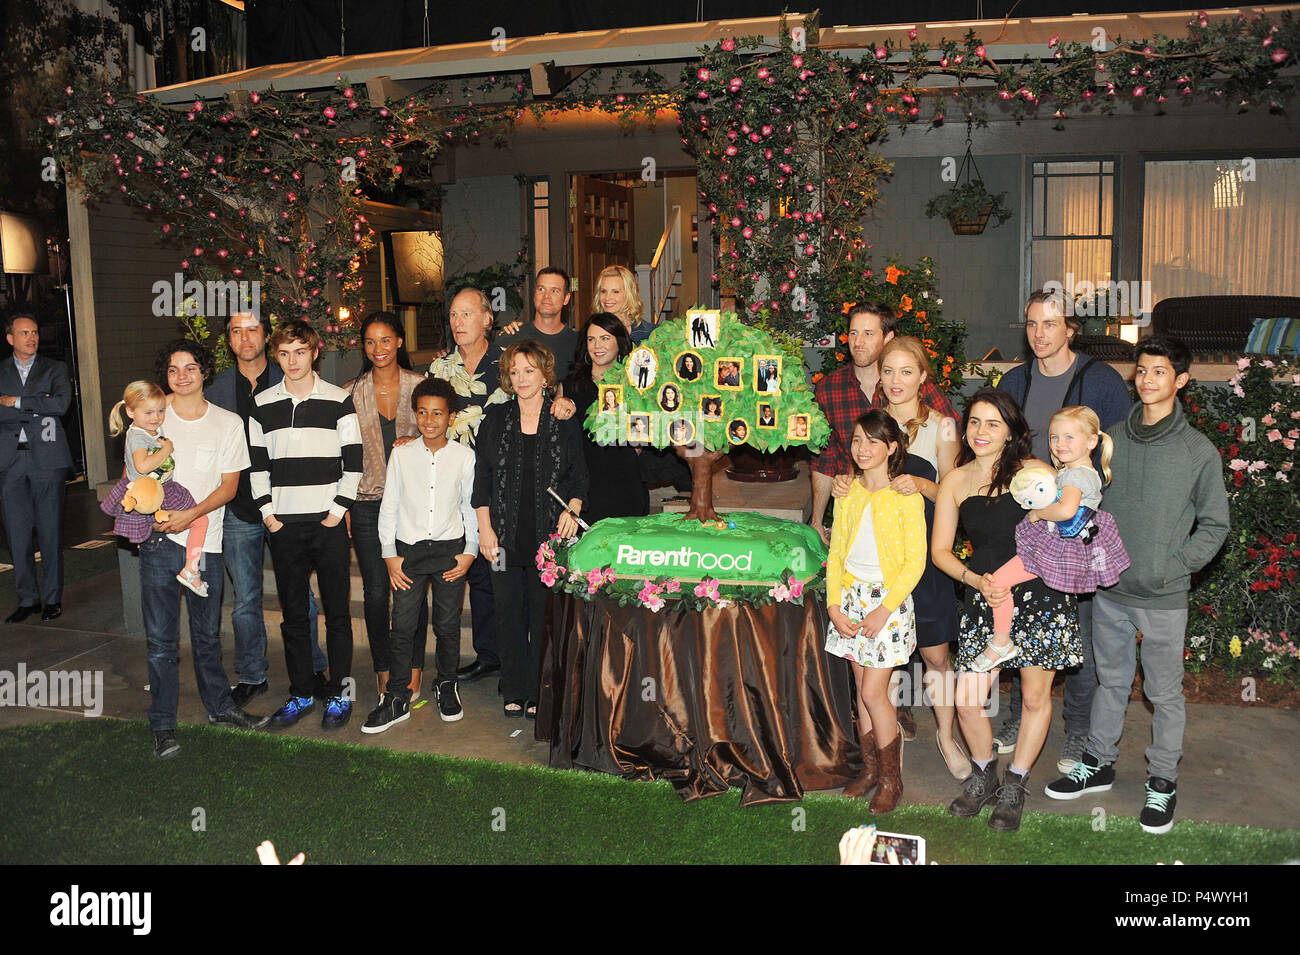 Max Burkholder, Ray Romano, Miles Heizer, Joy Bryant, Tyree Brown, Craig T. Nelson, Bonnie Bedelia, Lauren Graham, Peter Krause, Monica Potter, Sam Jaeger, Erika Christensen, Mae Whitman, Savannah Paige Rae, Dax Shepard and Xolo Mariduena   at ParentHood 100th Episode at the Universal Lot Stage 43 on Nov. 7, 2014 in Los Angeles.Max Burkholder, Ray Romano, Miles Heizer, Joy Bryant, Tyree Brown, Craig T. Nelson, Bonnie Bedelia, Lauren Graham, Peter Krause, Monica Potter, Sam Jaeger, Erika Christensen, Mae Whitman, Savannah Paige Rae, Dax Shepard and Xolo Mariduena 159  Event in Hollywood Life -  Stock Photo